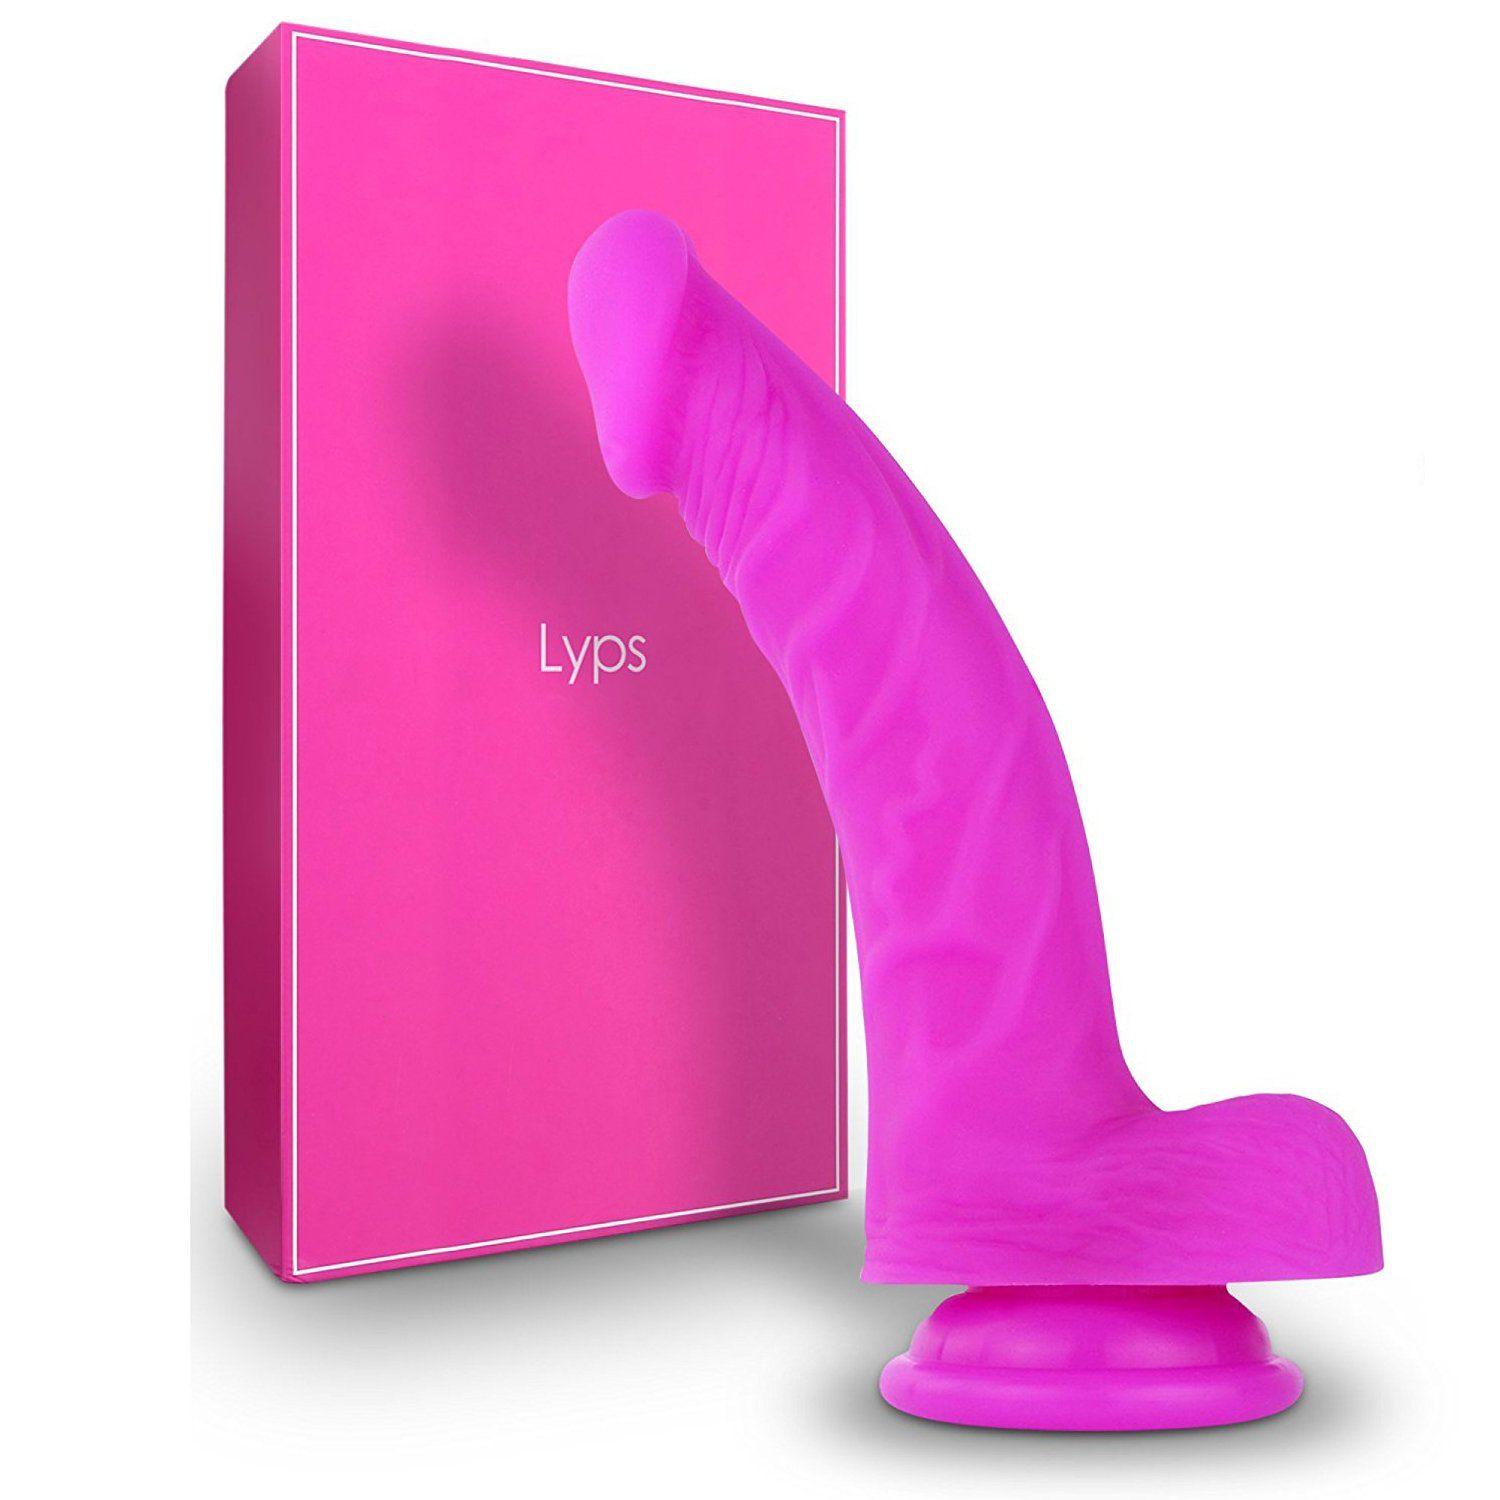 The best rated dildo